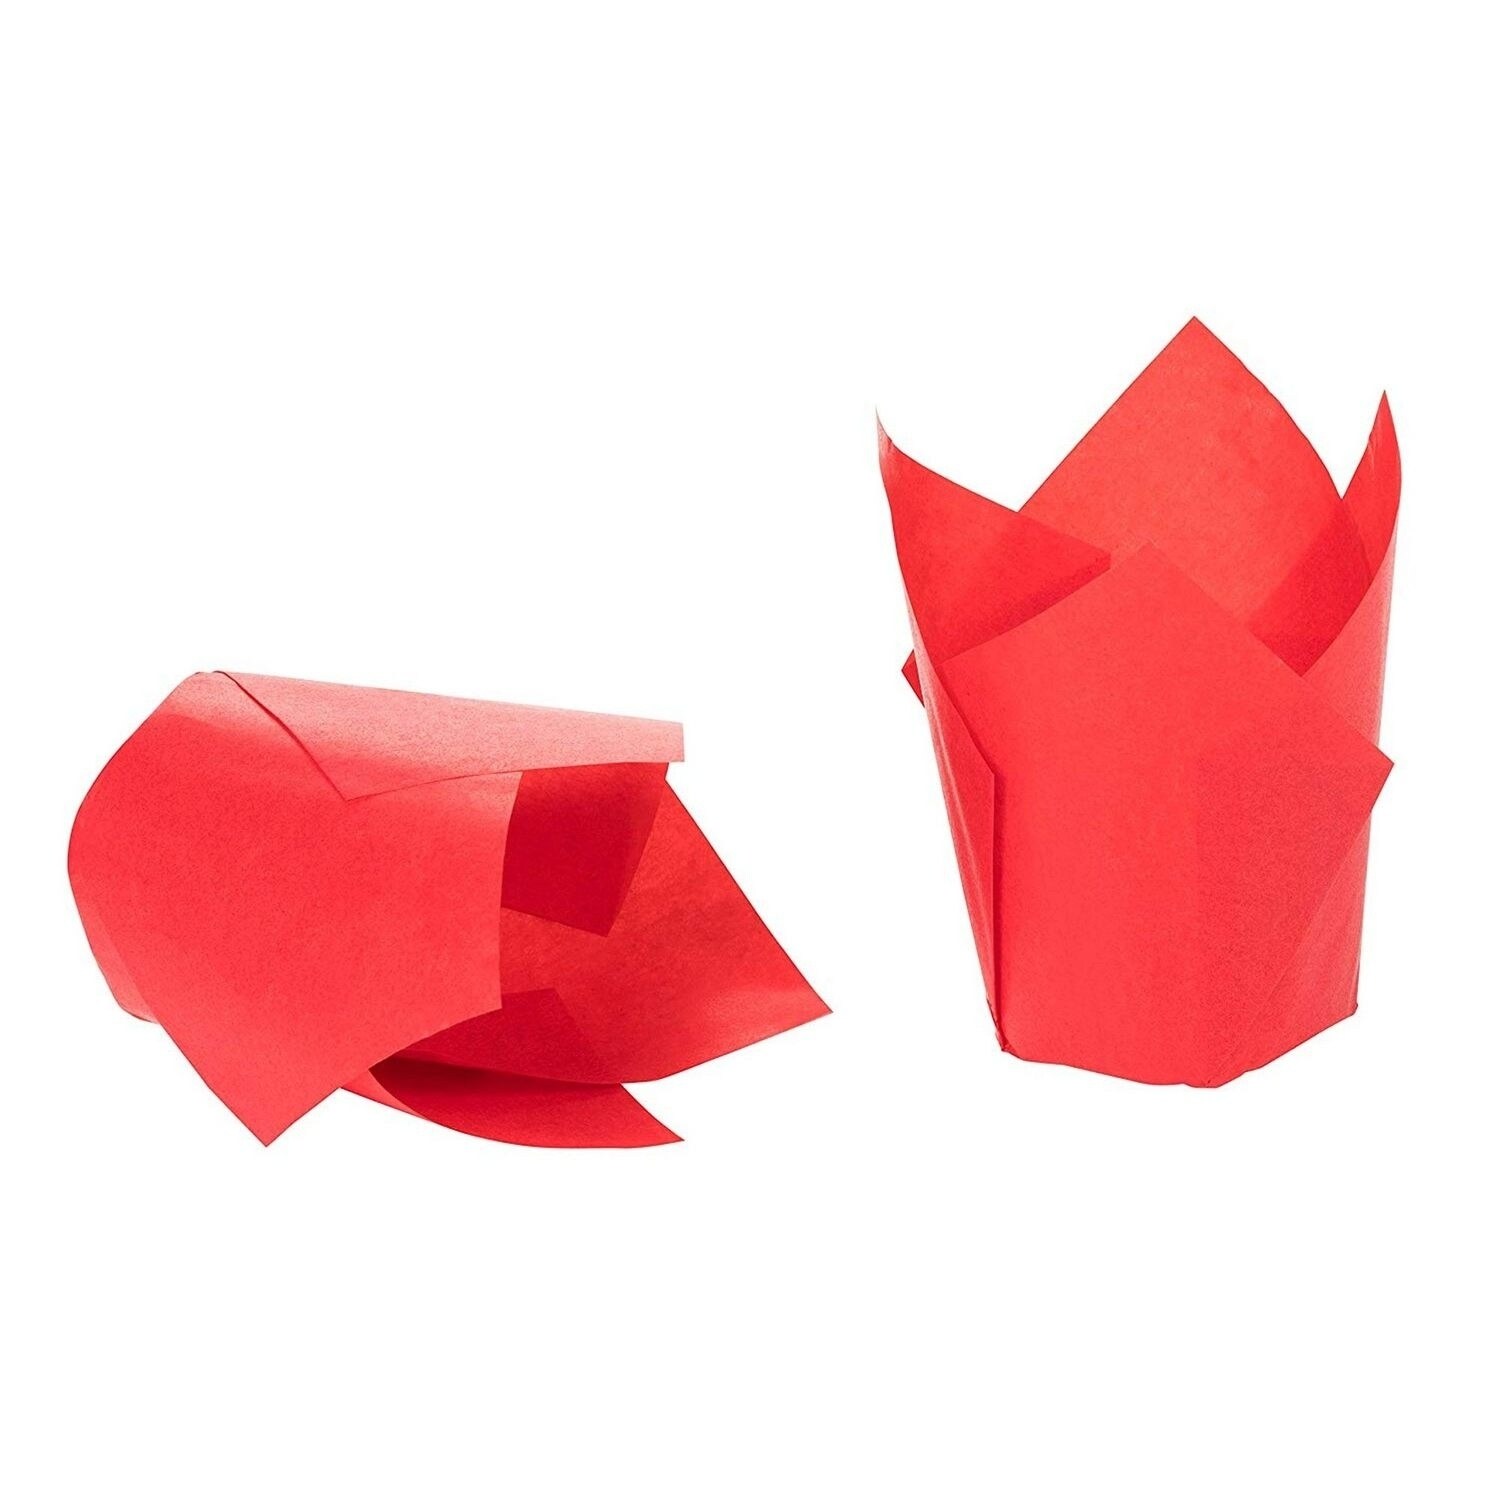 https://ak1.ostkcdn.com/images/products/29792506/100-Tulip-Cupcake-Liners-Medium-Baking-Cups-Muffin-Wrappers-for-Bakeries-Red-f0c71995-6278-4395-a8ab-b21d9492d9f2.jpg